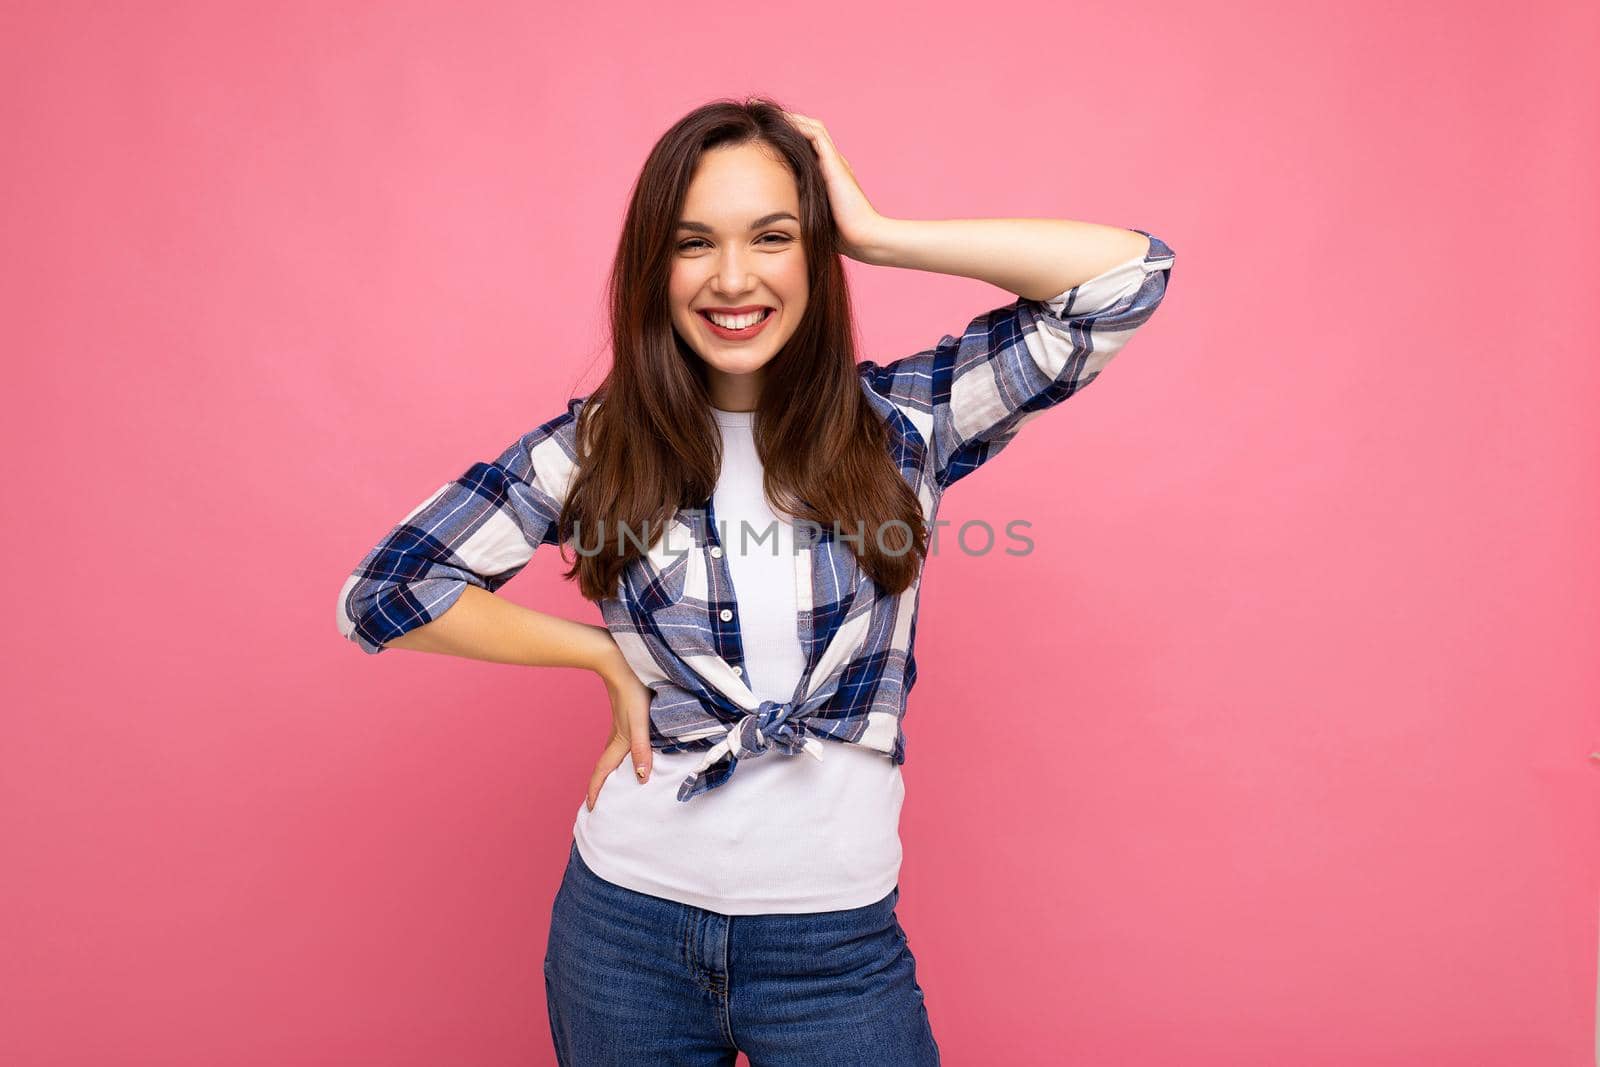 Portrait of positive cheerful fashionable woman in hipster outfit isolated on pink background with copy space.